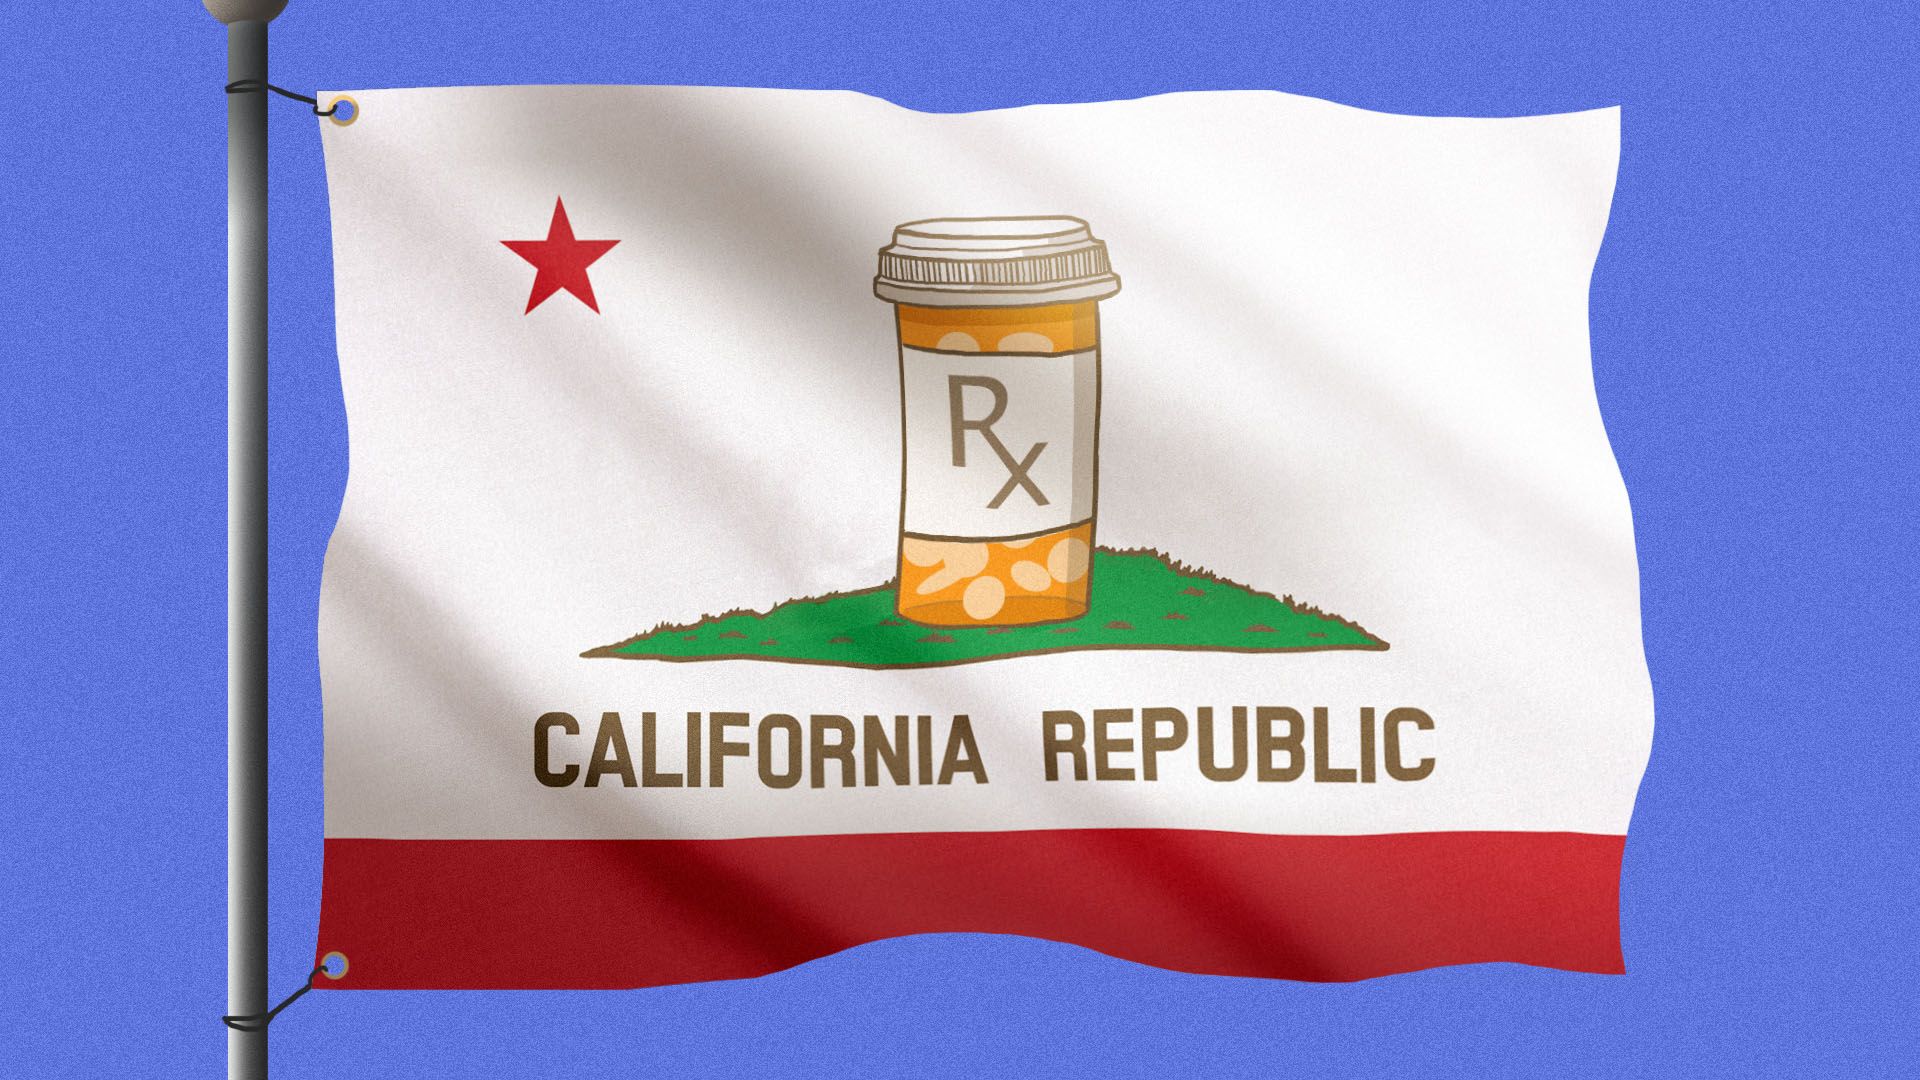 Illustration of the California state flag with the bear replaced by a pill bottle